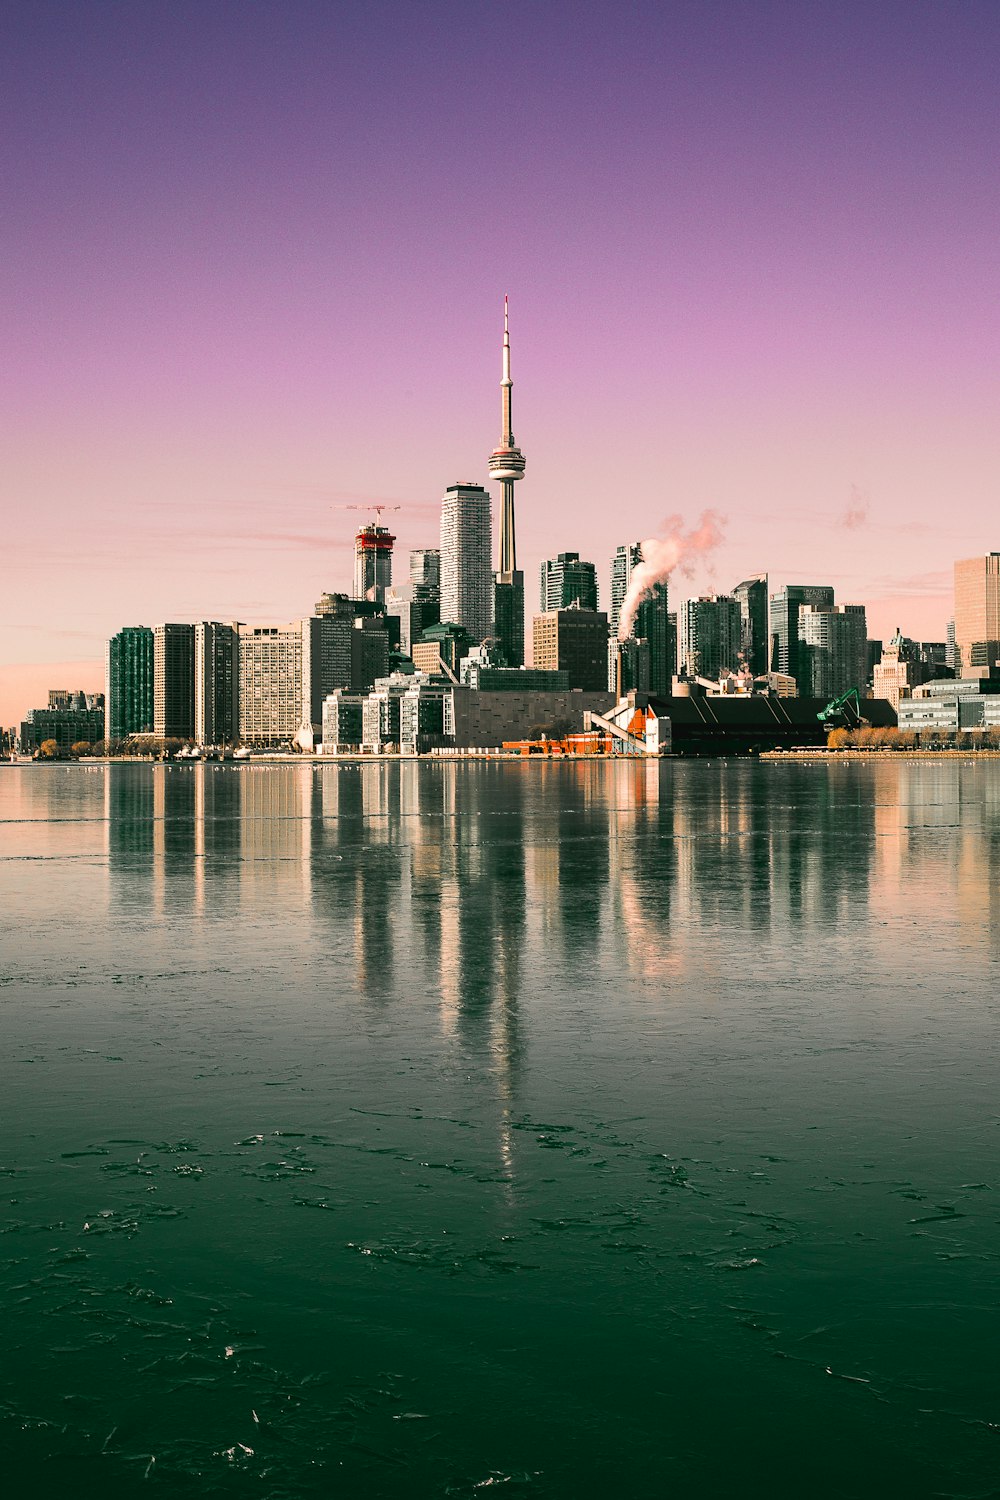 100+ Toronto Pictures [Stunning] | Download Free Images on Unsplash